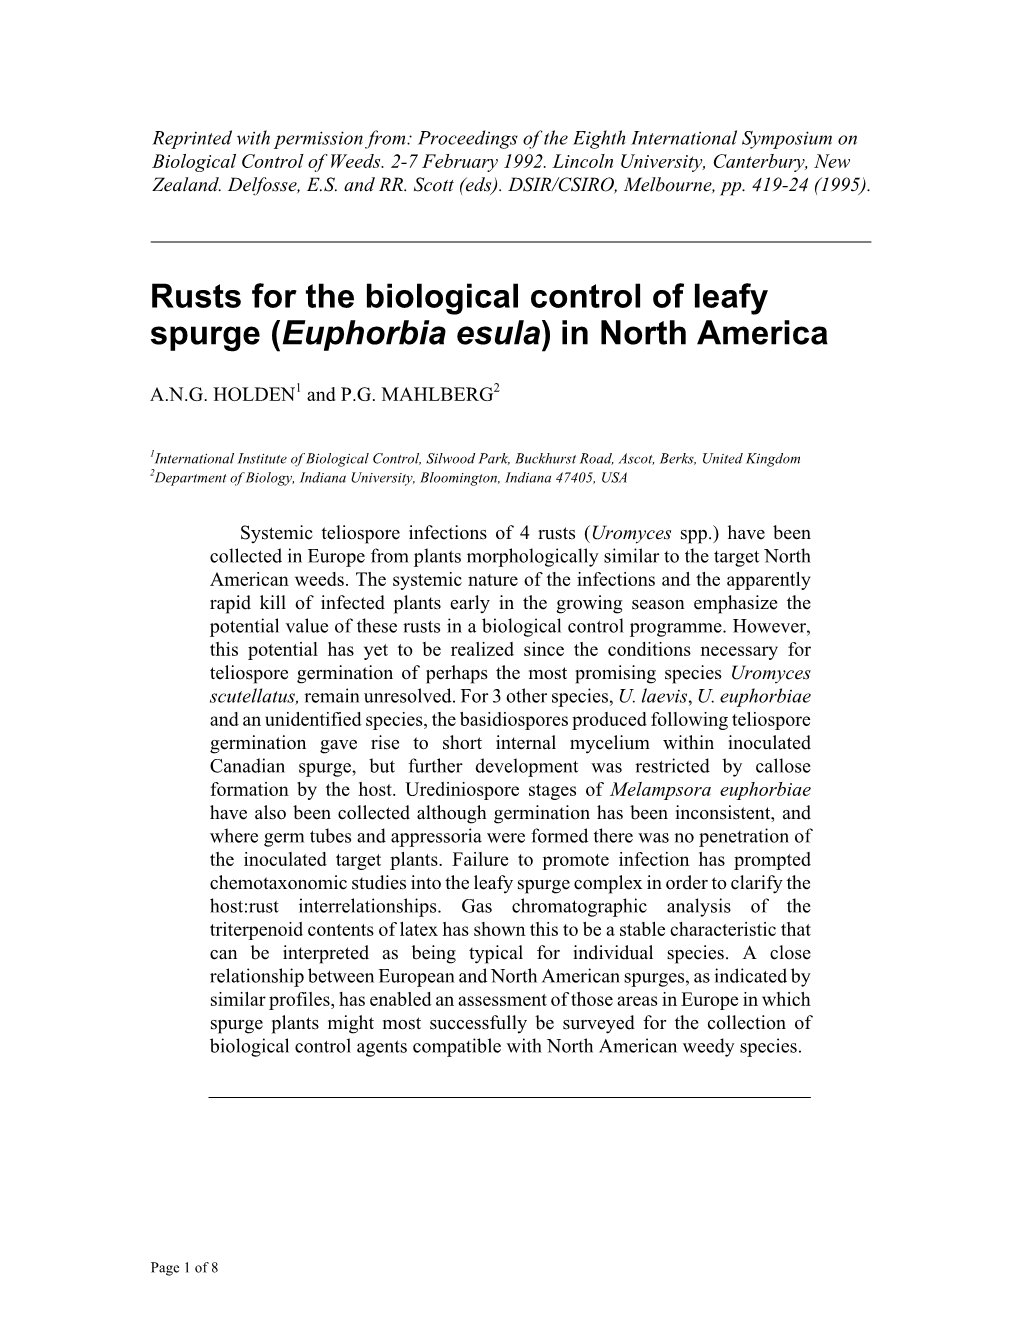 Rusts for the Biological Control of Leafy Spurge (Euphorbia Esula) in North America